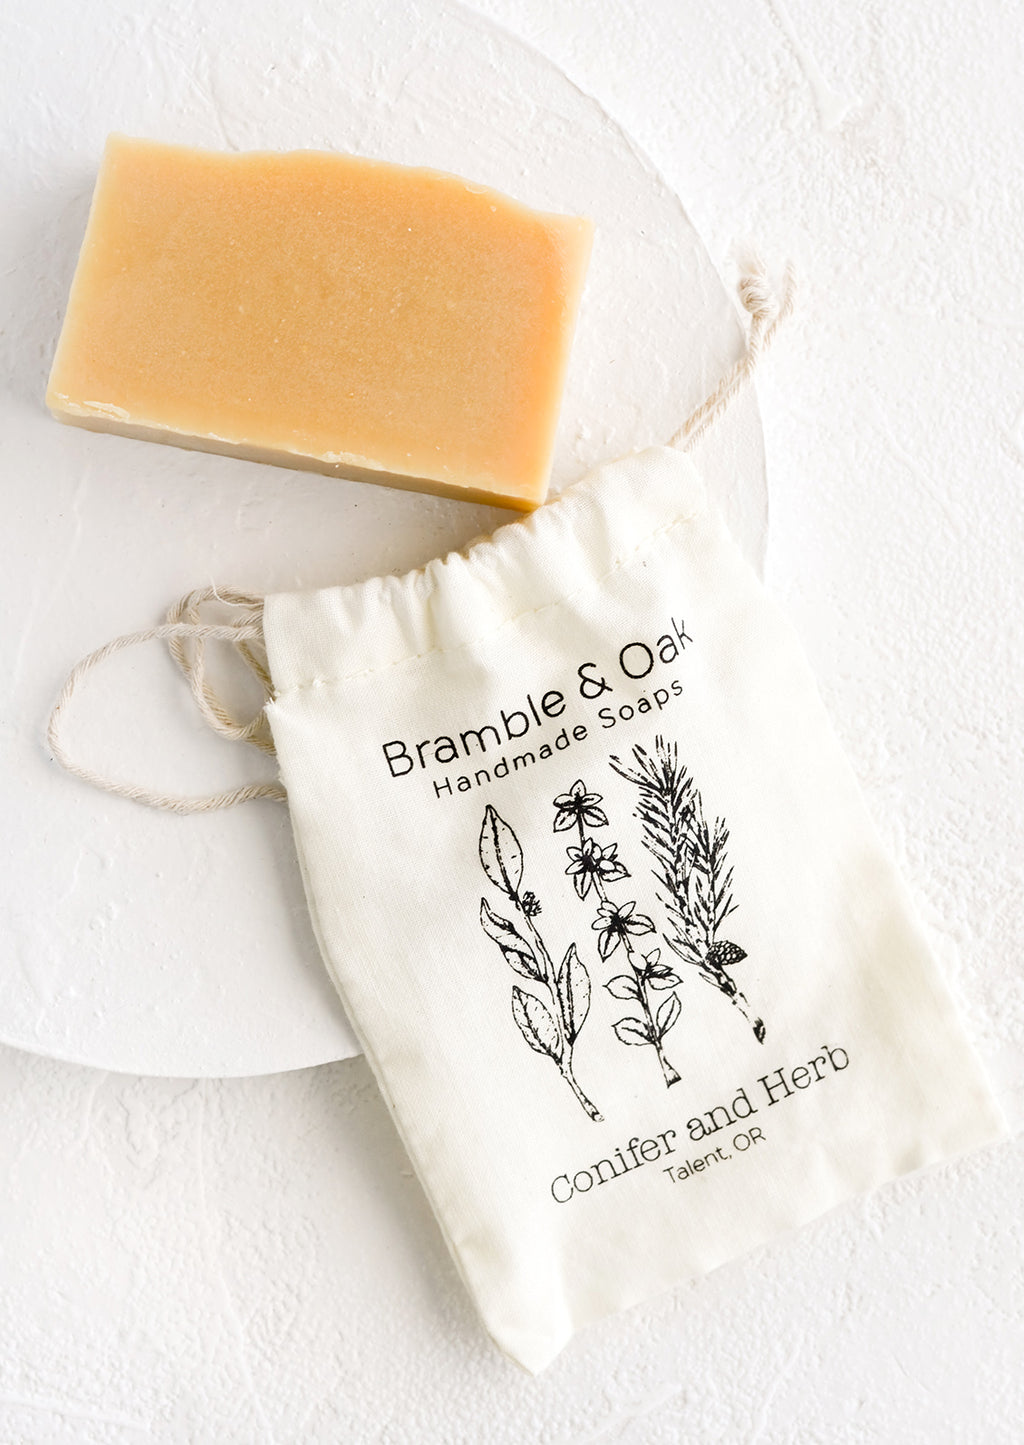 Conifer & Herb: A printed muslin bag with a bar of soap.